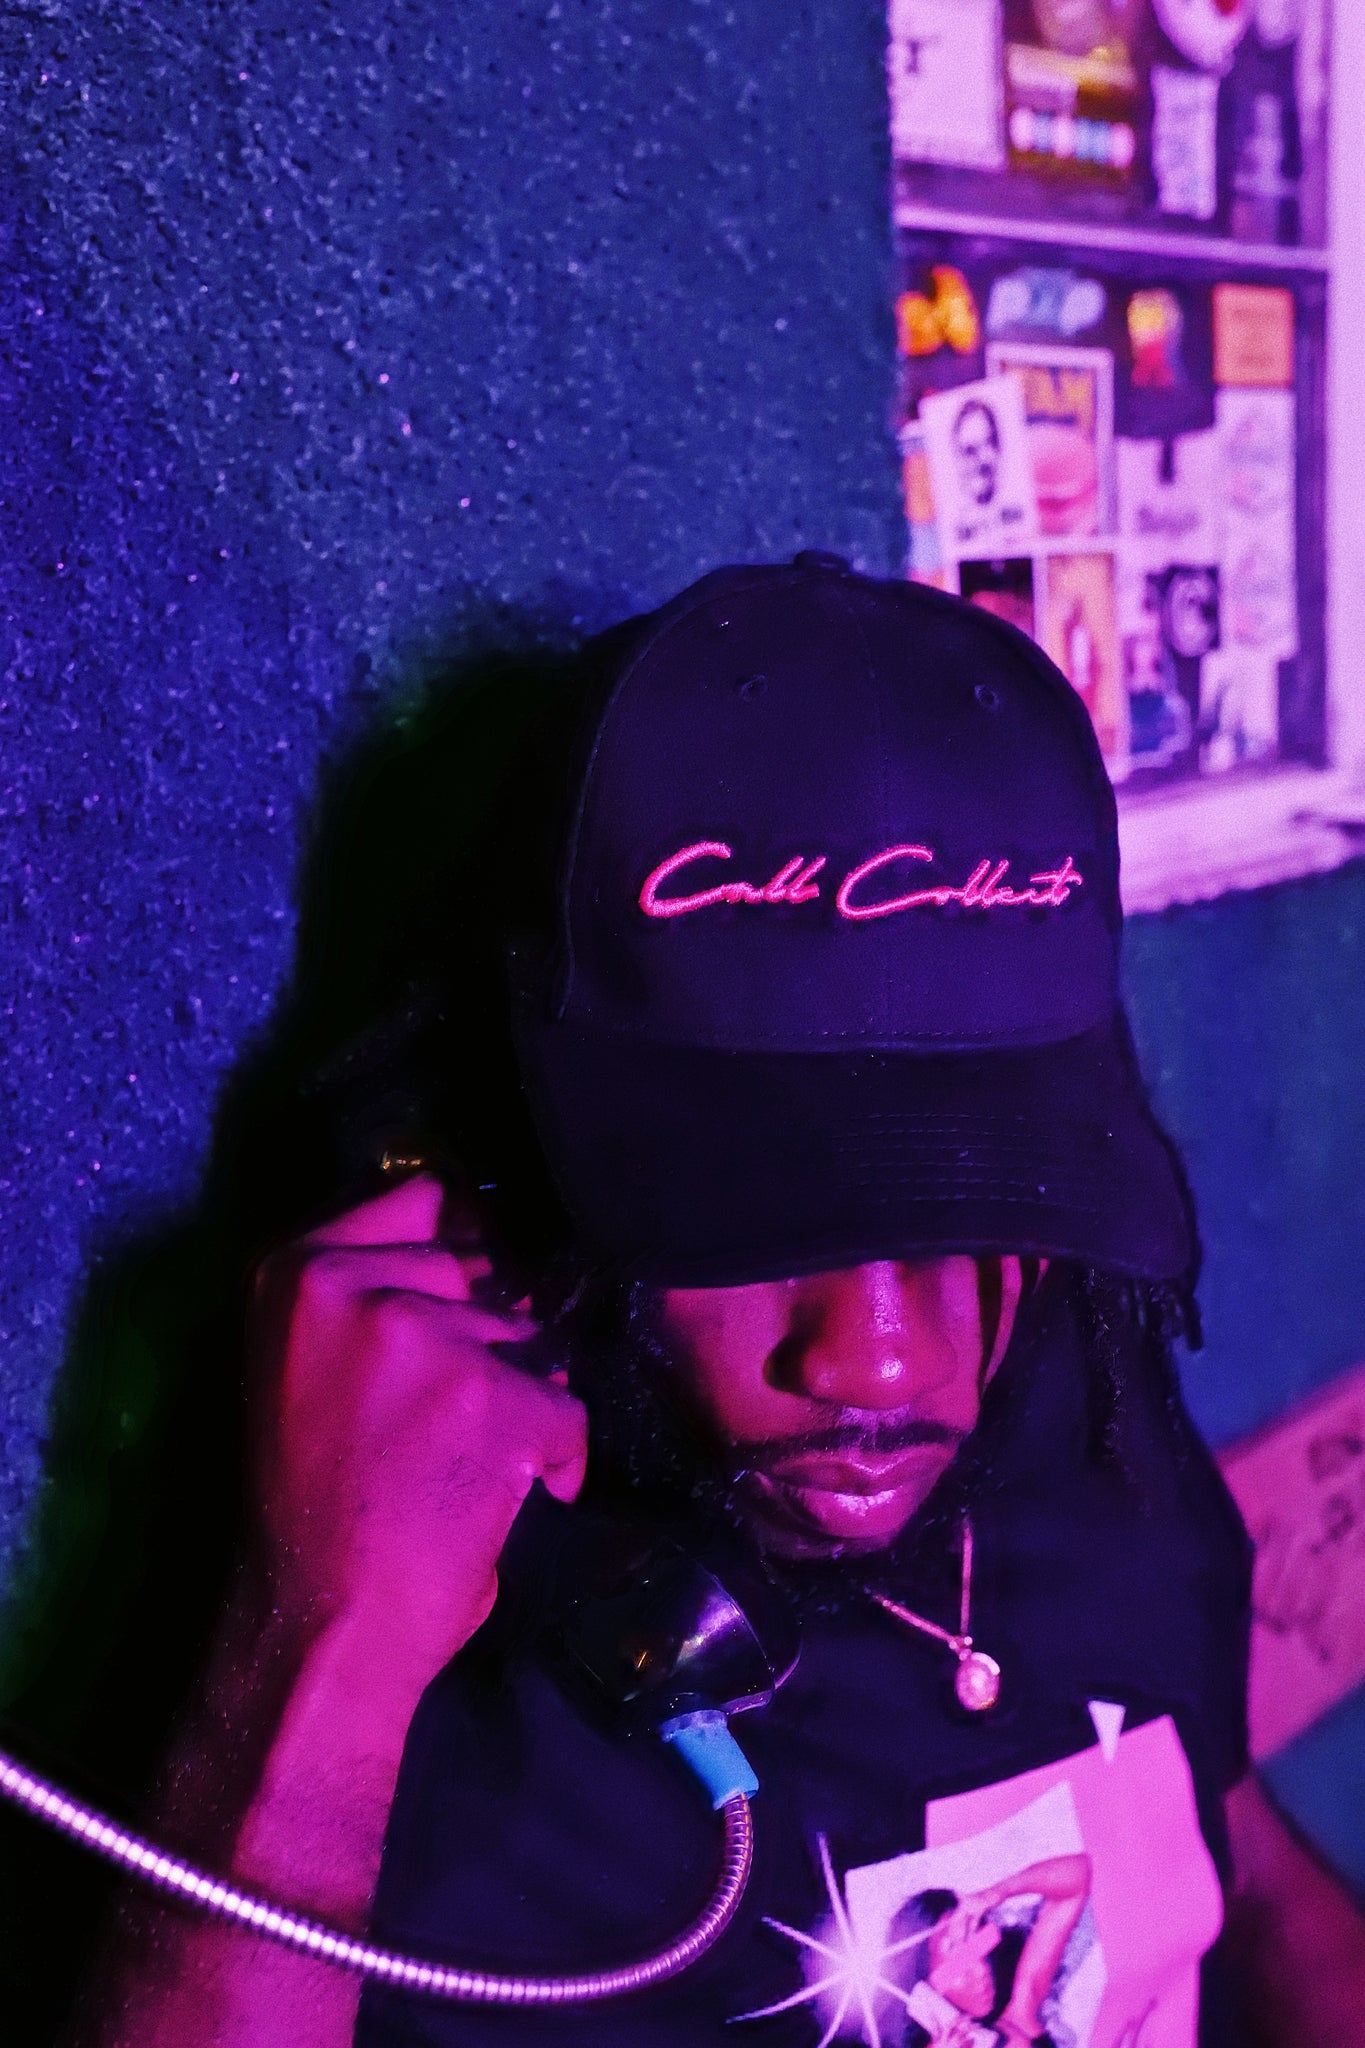 Call Collect - Dad Hat "CC in Cursive"